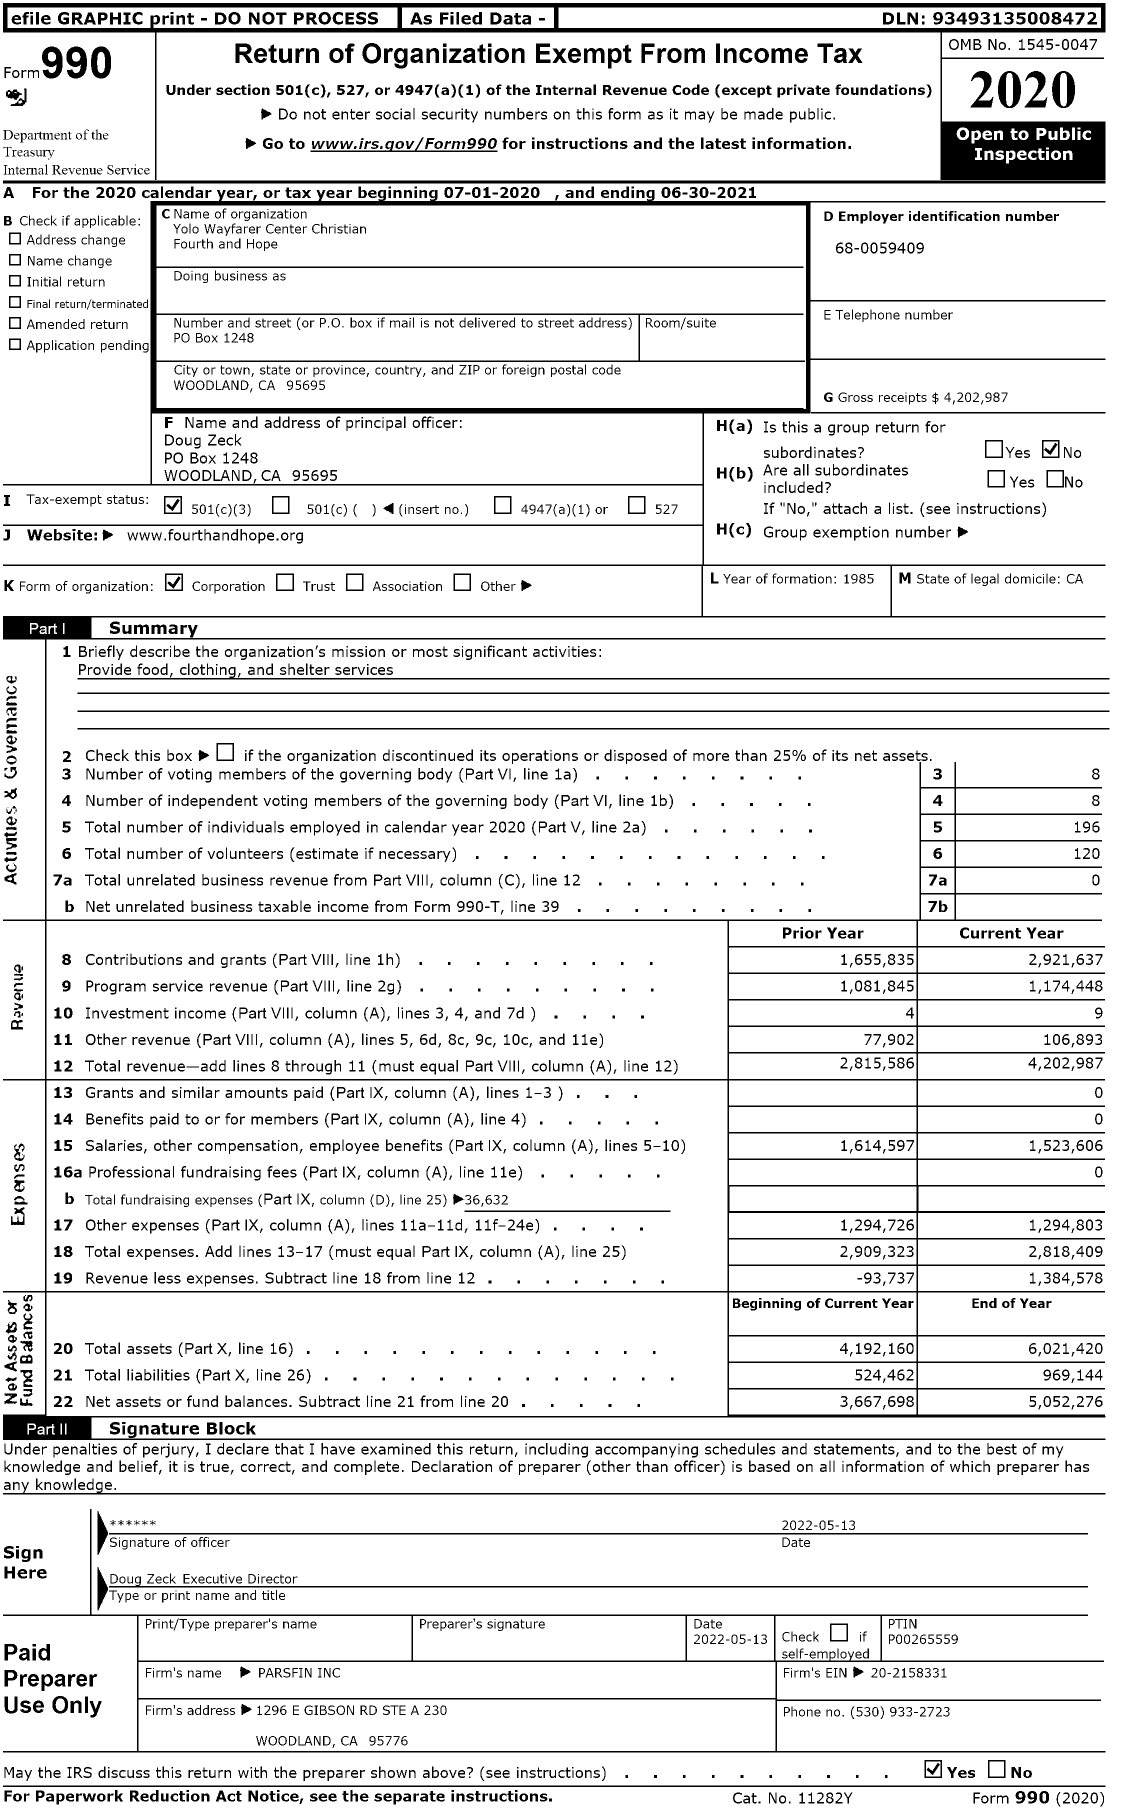 Image of first page of 2020 Form 990 for Yolo Wayfarer Center Christian Fourth and Hope